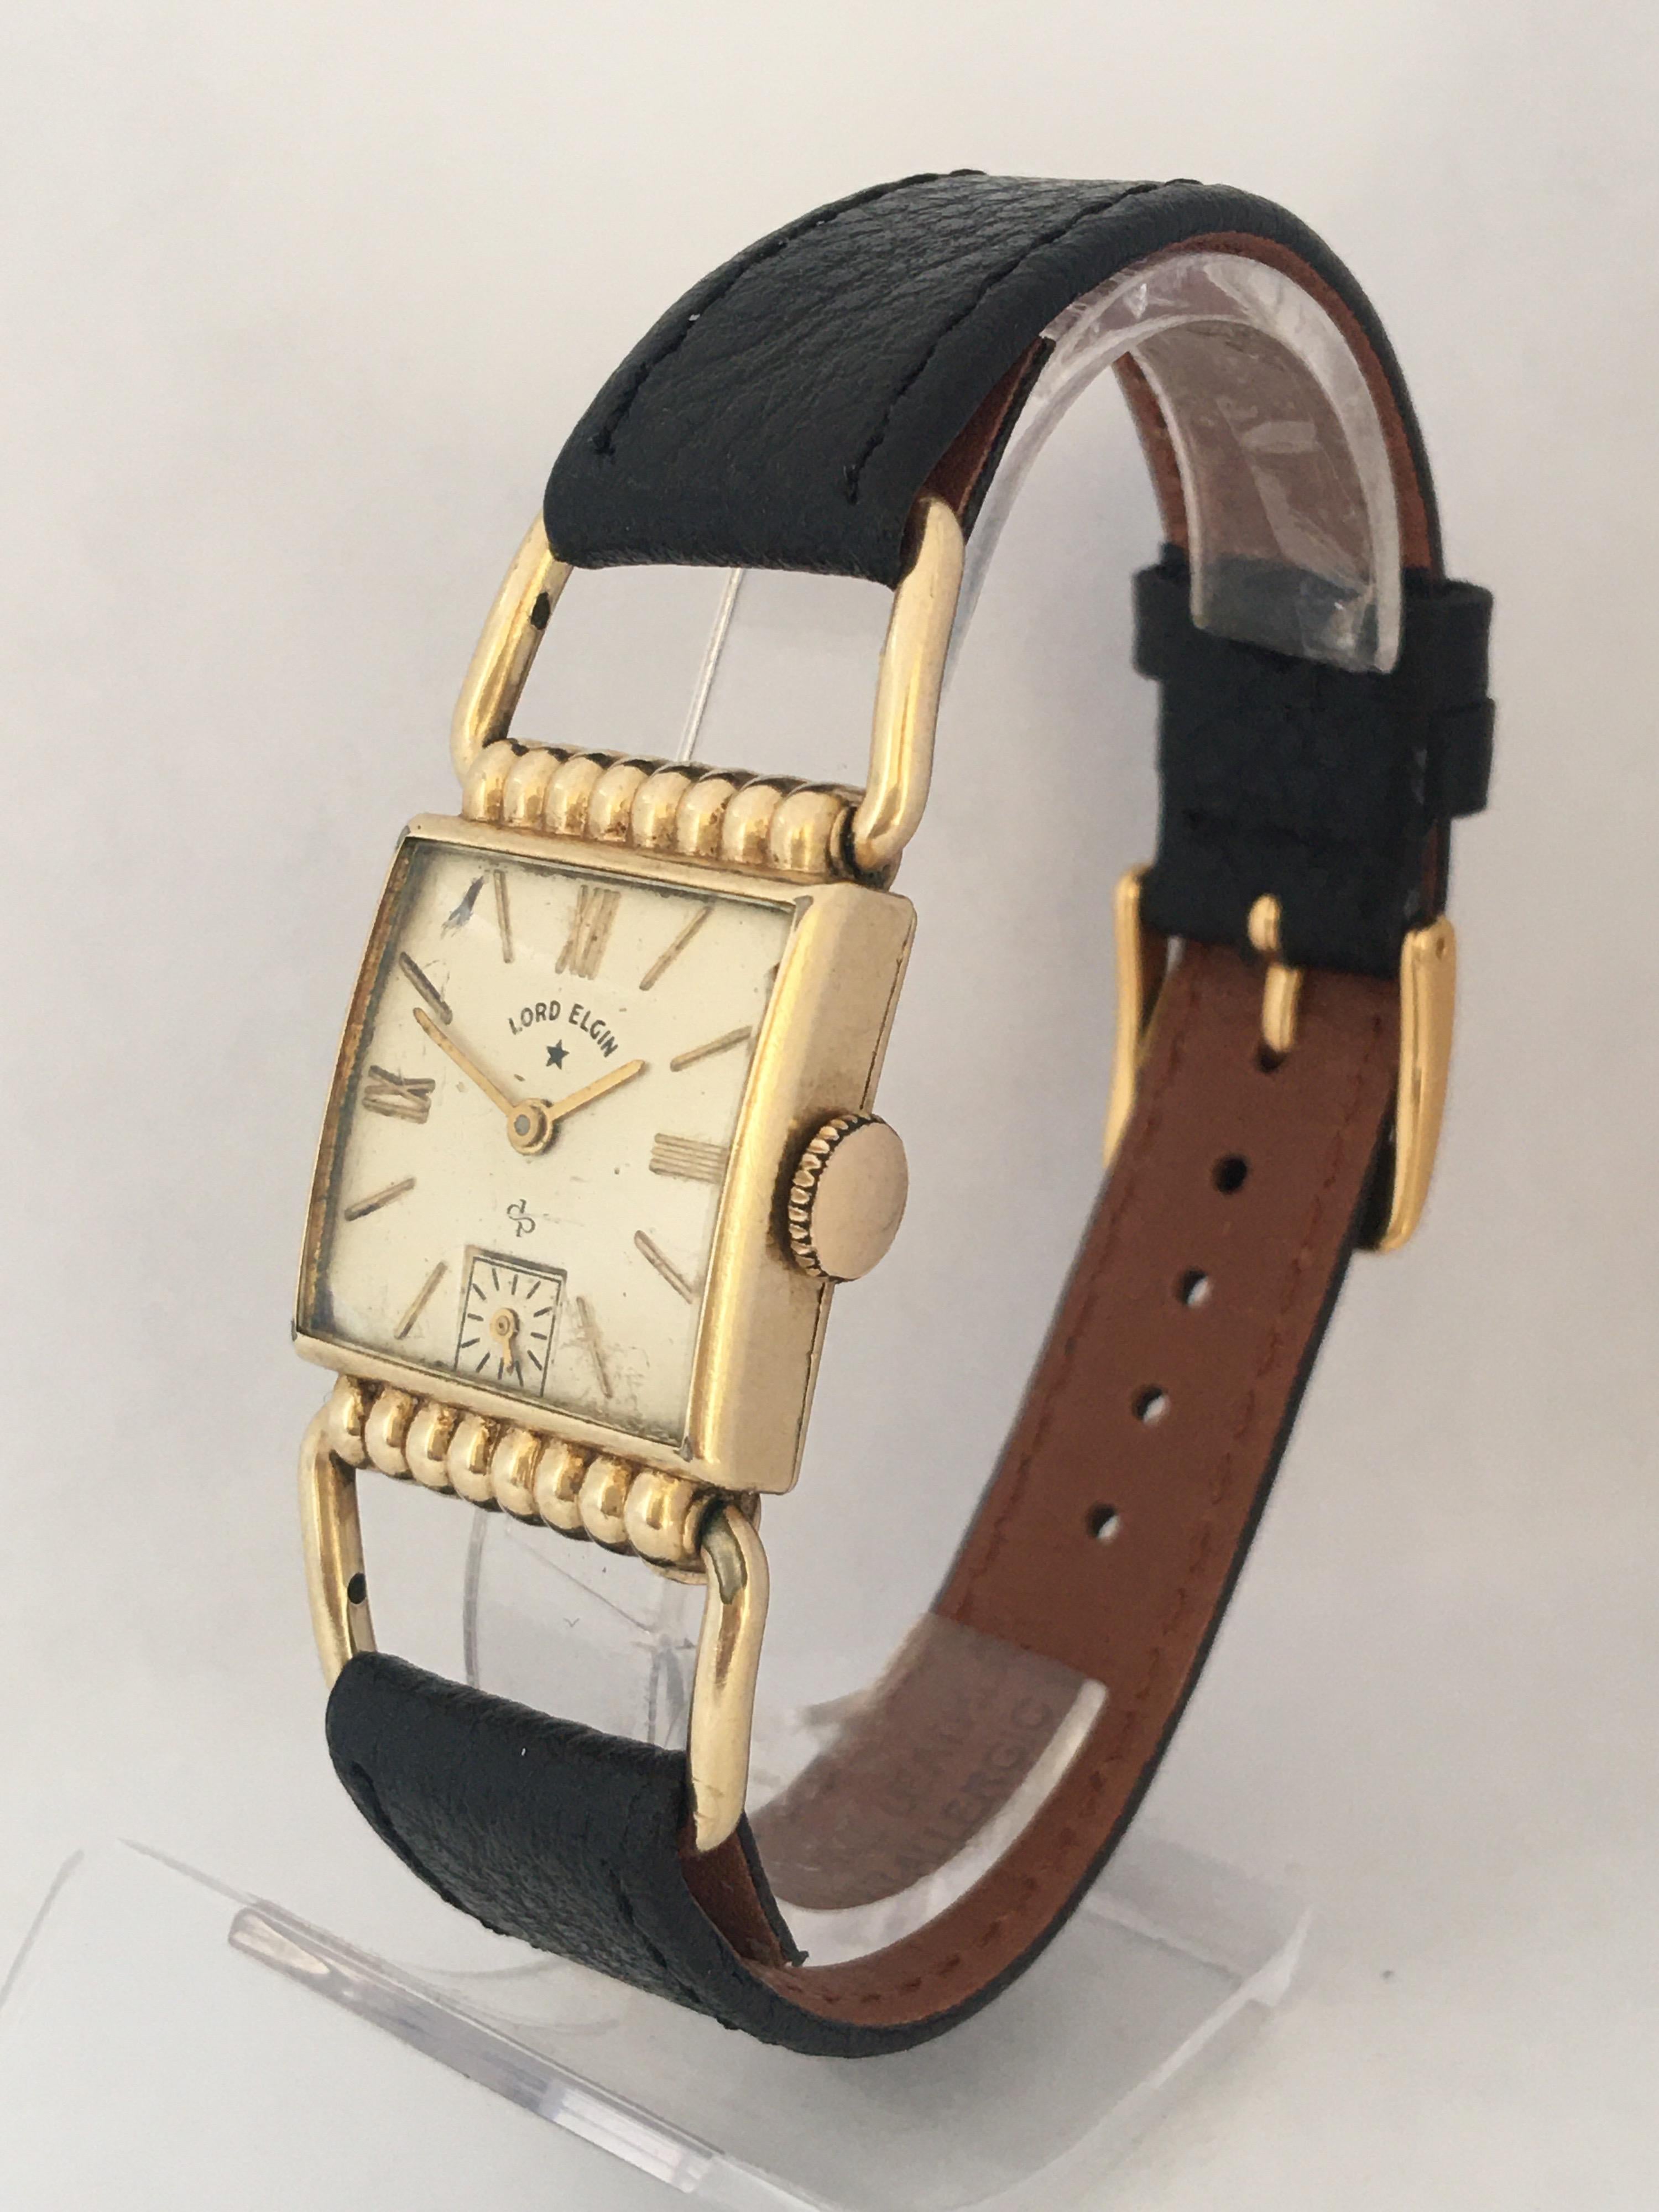 This beautiful vintage 21mmlong by 21mm wide hand winding watch is in good working condition and it is ticking well. It has recently been serviced and it runs well ( It keeps a good time). Visible signs of ageing and wear with light marks on the